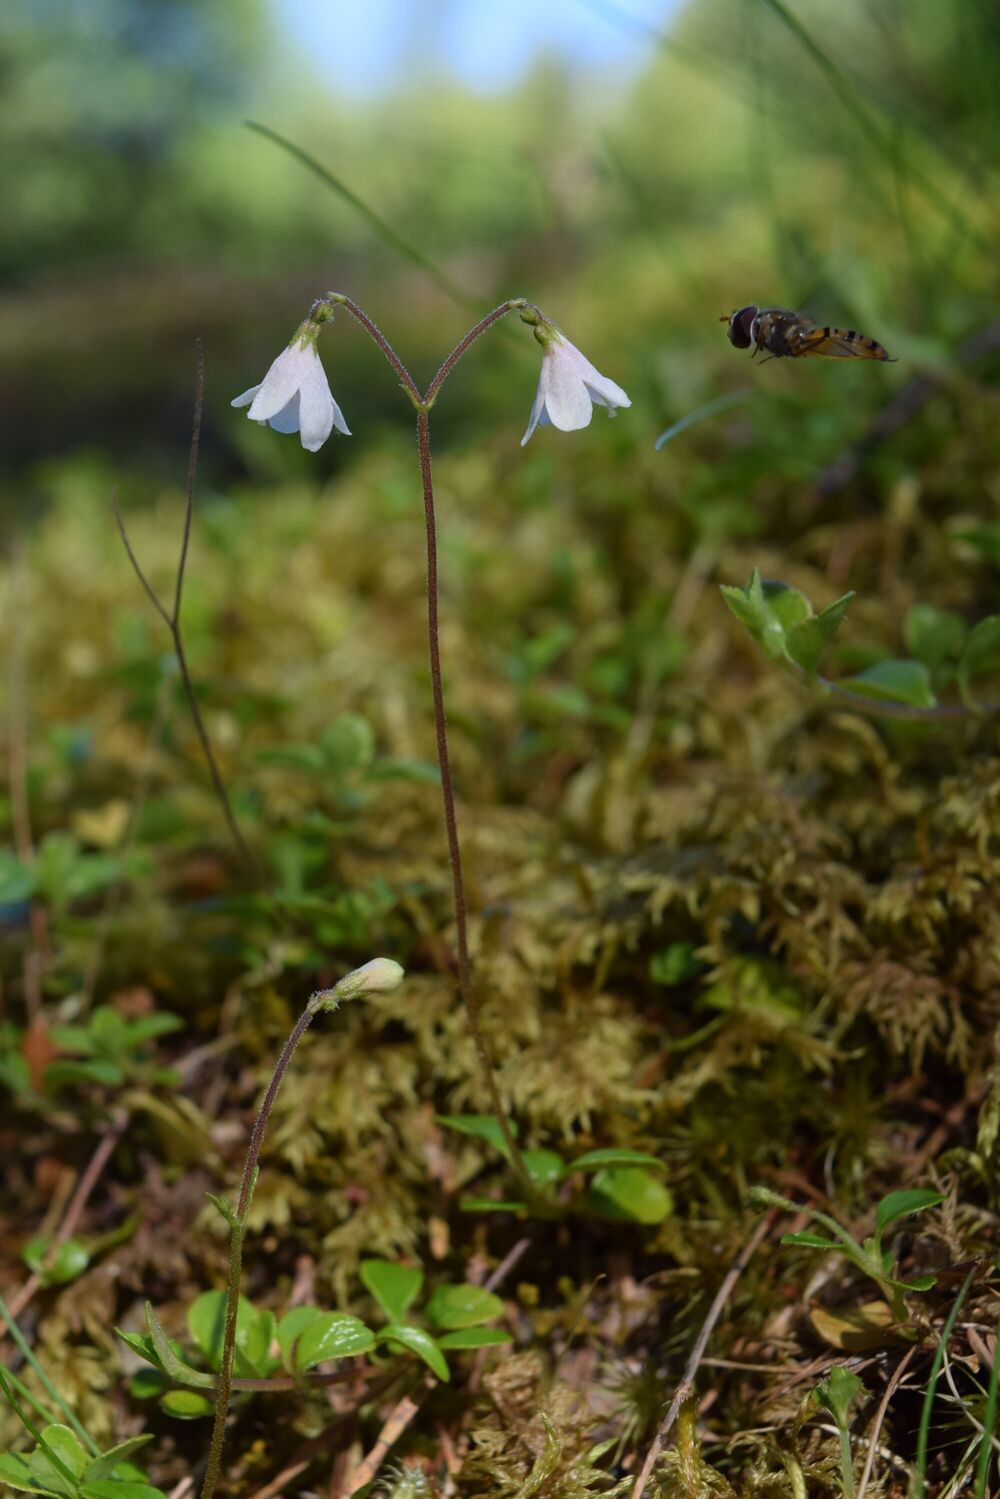 A single twinflower plant, with a pollinator hovering next to it.